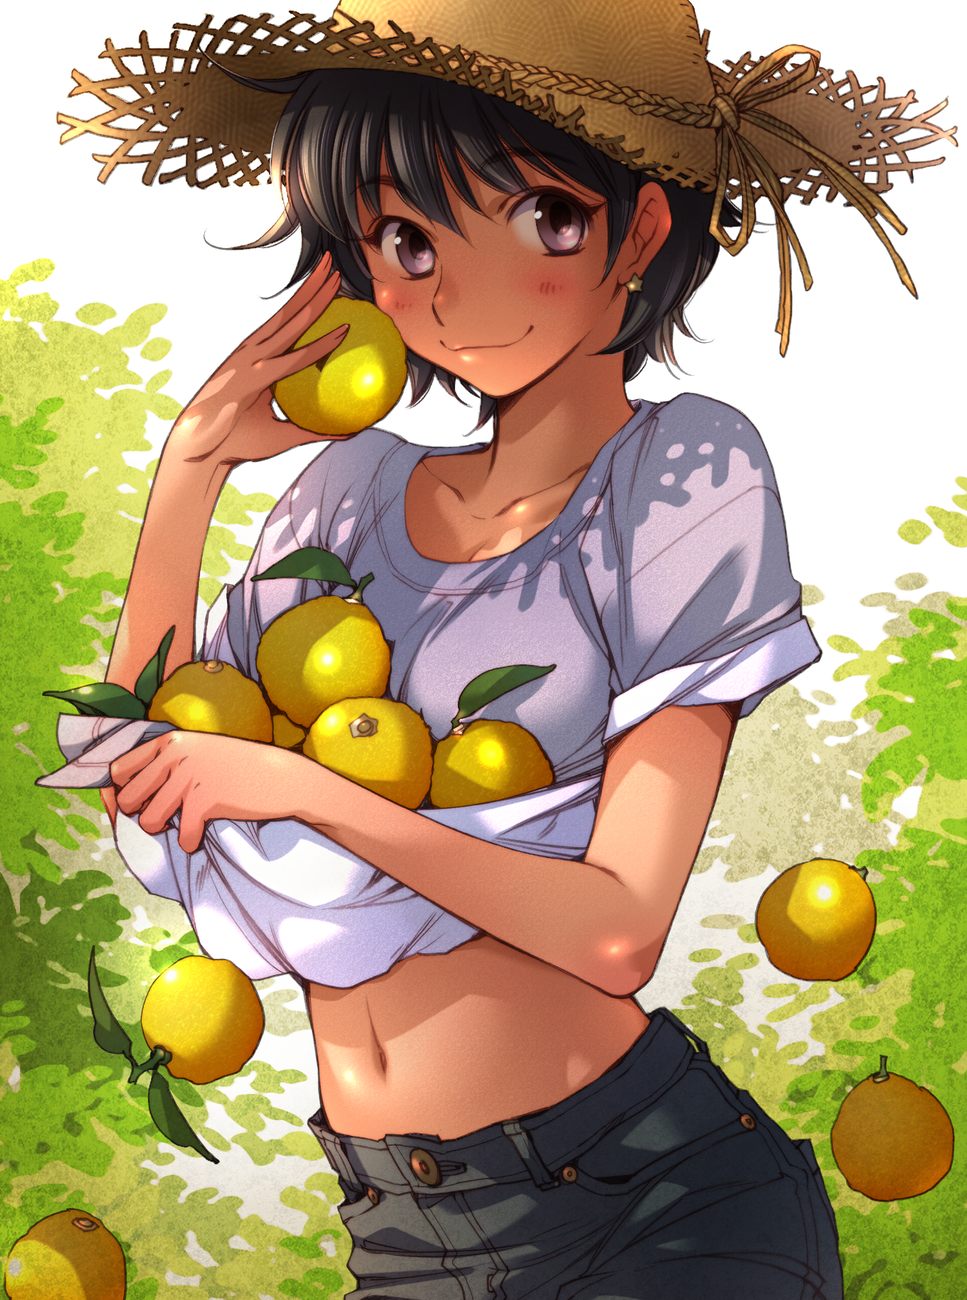 1girl bangs black_hair blush carrying closed_mouth collarbone commentary_request day denim earrings eyebrows_visible_through_hair food fruit hat highres holding holding_fruit jeans jewelry kerorin looking_at_viewer midriff navel orange pants shirt shirt_basket short_hair short_sleeves sleeves_rolled_up smile solo standing star star_earrings straw_hat sun_hat t-shirt tree violet_eyes